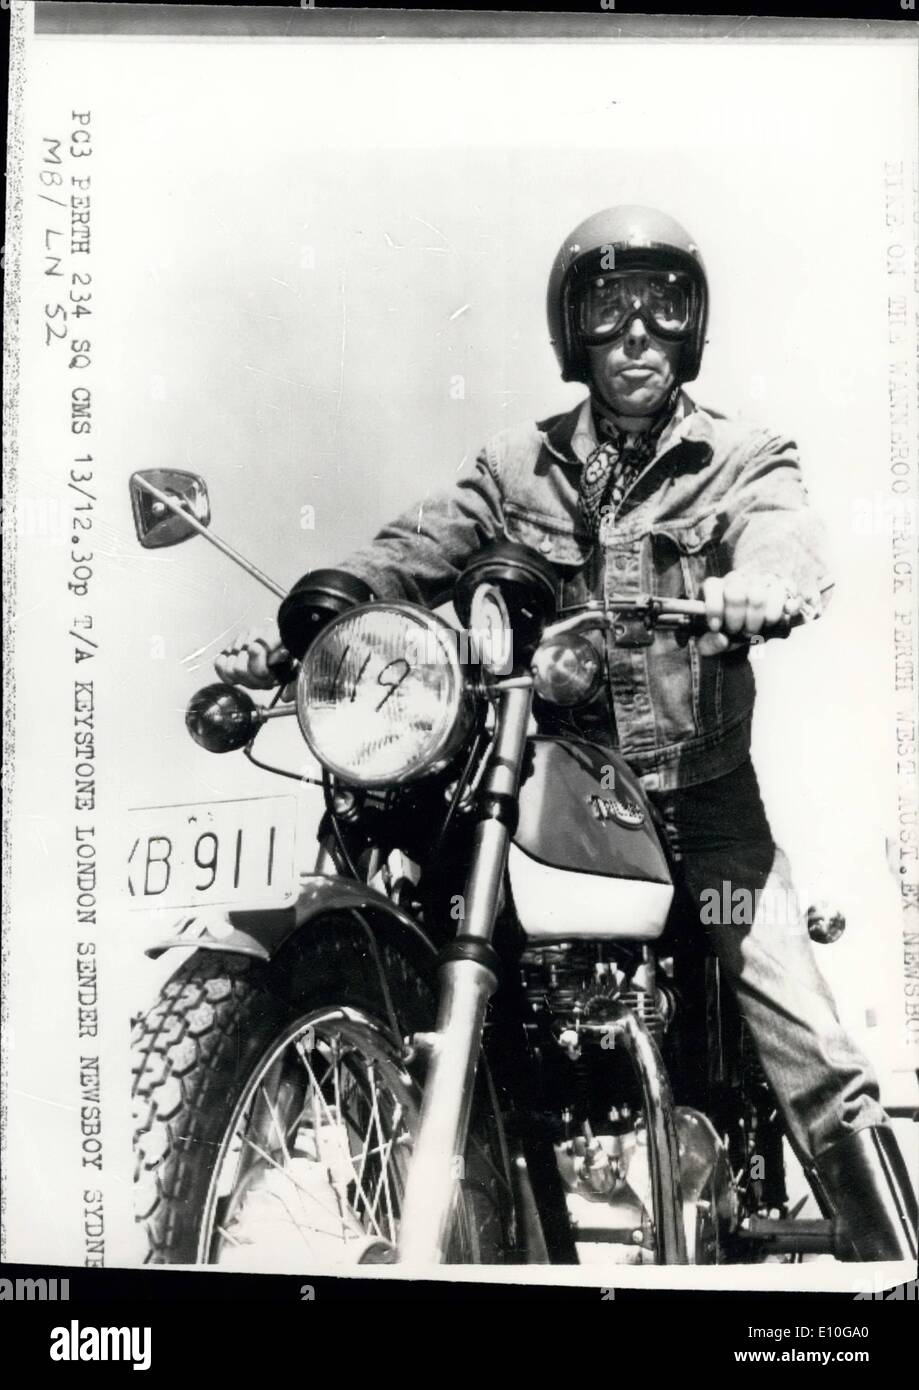 Oct. 13, 1972 - October 13th 1972 Lord Snowdon does a ton. Goggled and helmeted Lord Snowdon looks every inch a motor cyclist pictured today at Wanneroo track, Perth, Western Australia, where he completed about 20 laps of the track, sometimes reaching 100 mph. today. Stock Photo